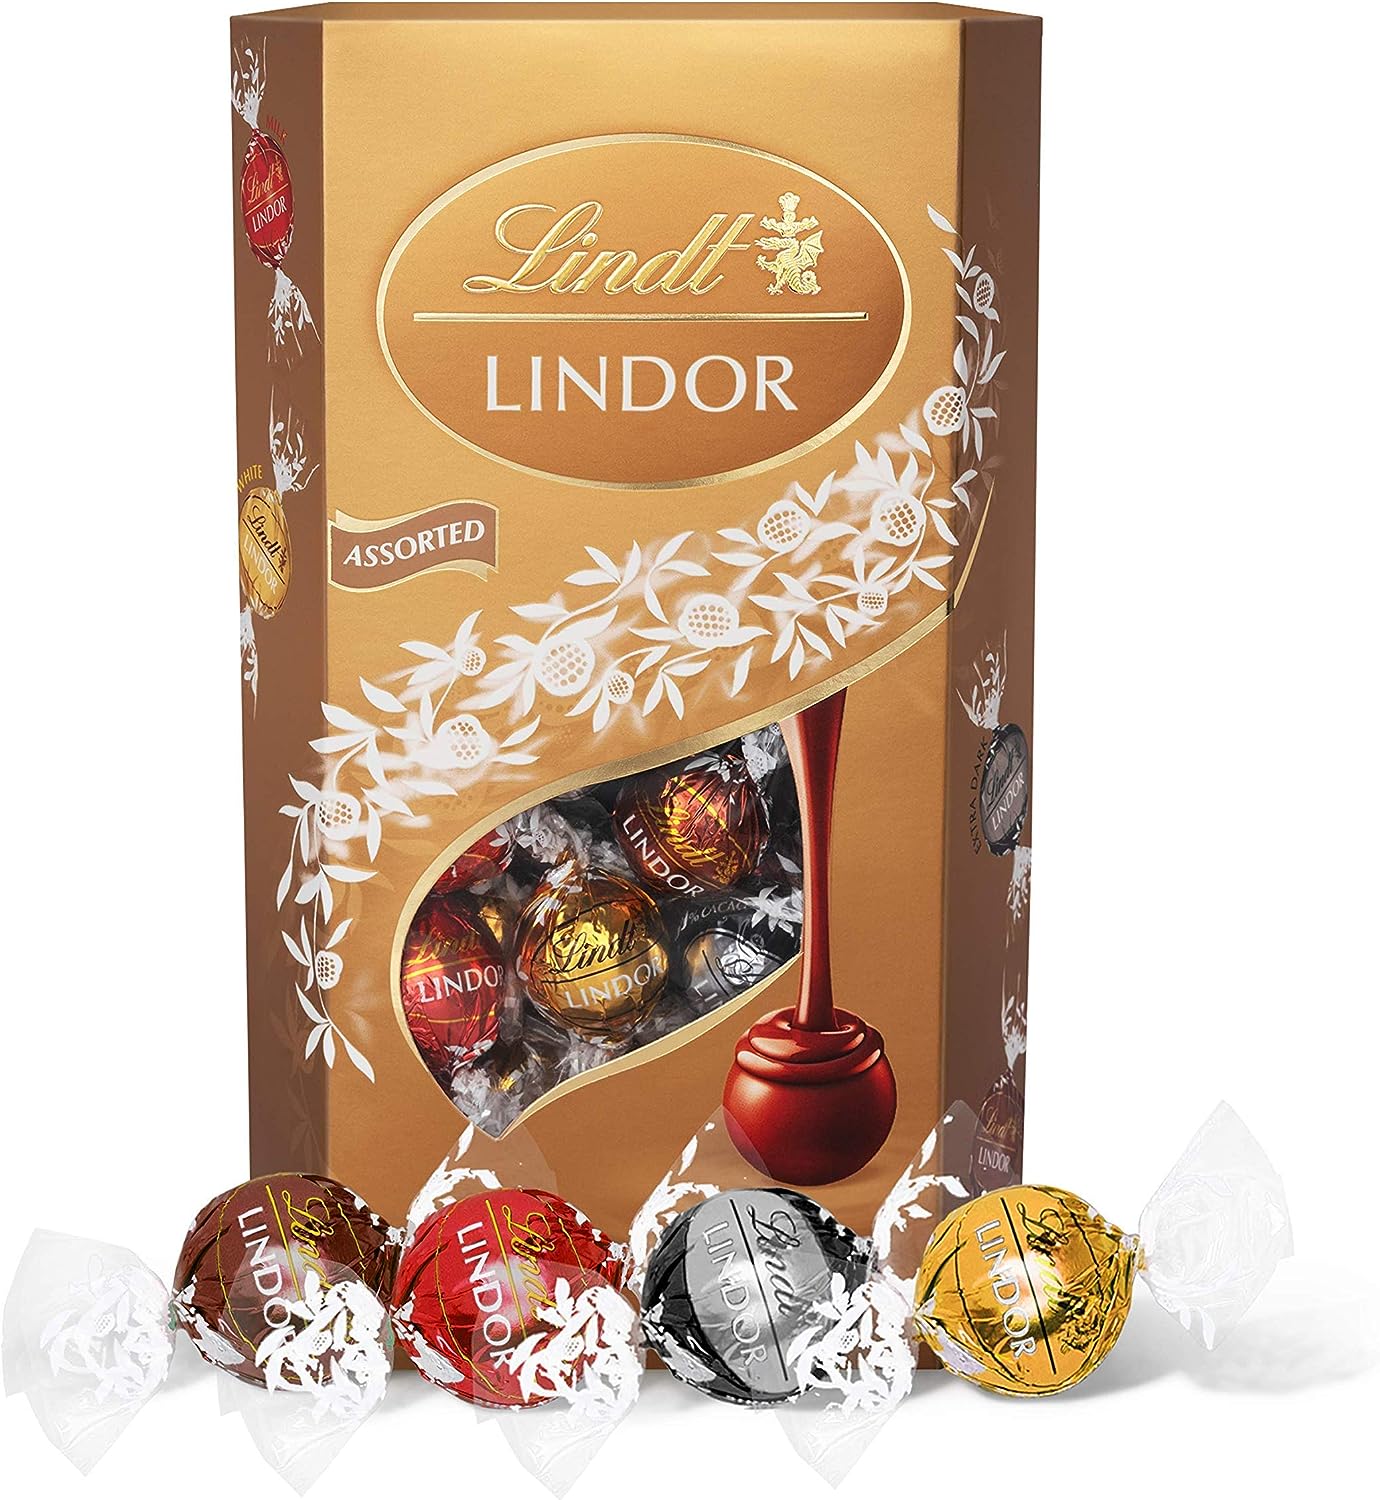 Lindt LINDOR Assorted Chocolate Truffles Box - approx. 26 Balls, 337g - ideal for Sharing and Gifting, Mother’s Day Gift - Chocolate Balls with a Smooth Melting Filling